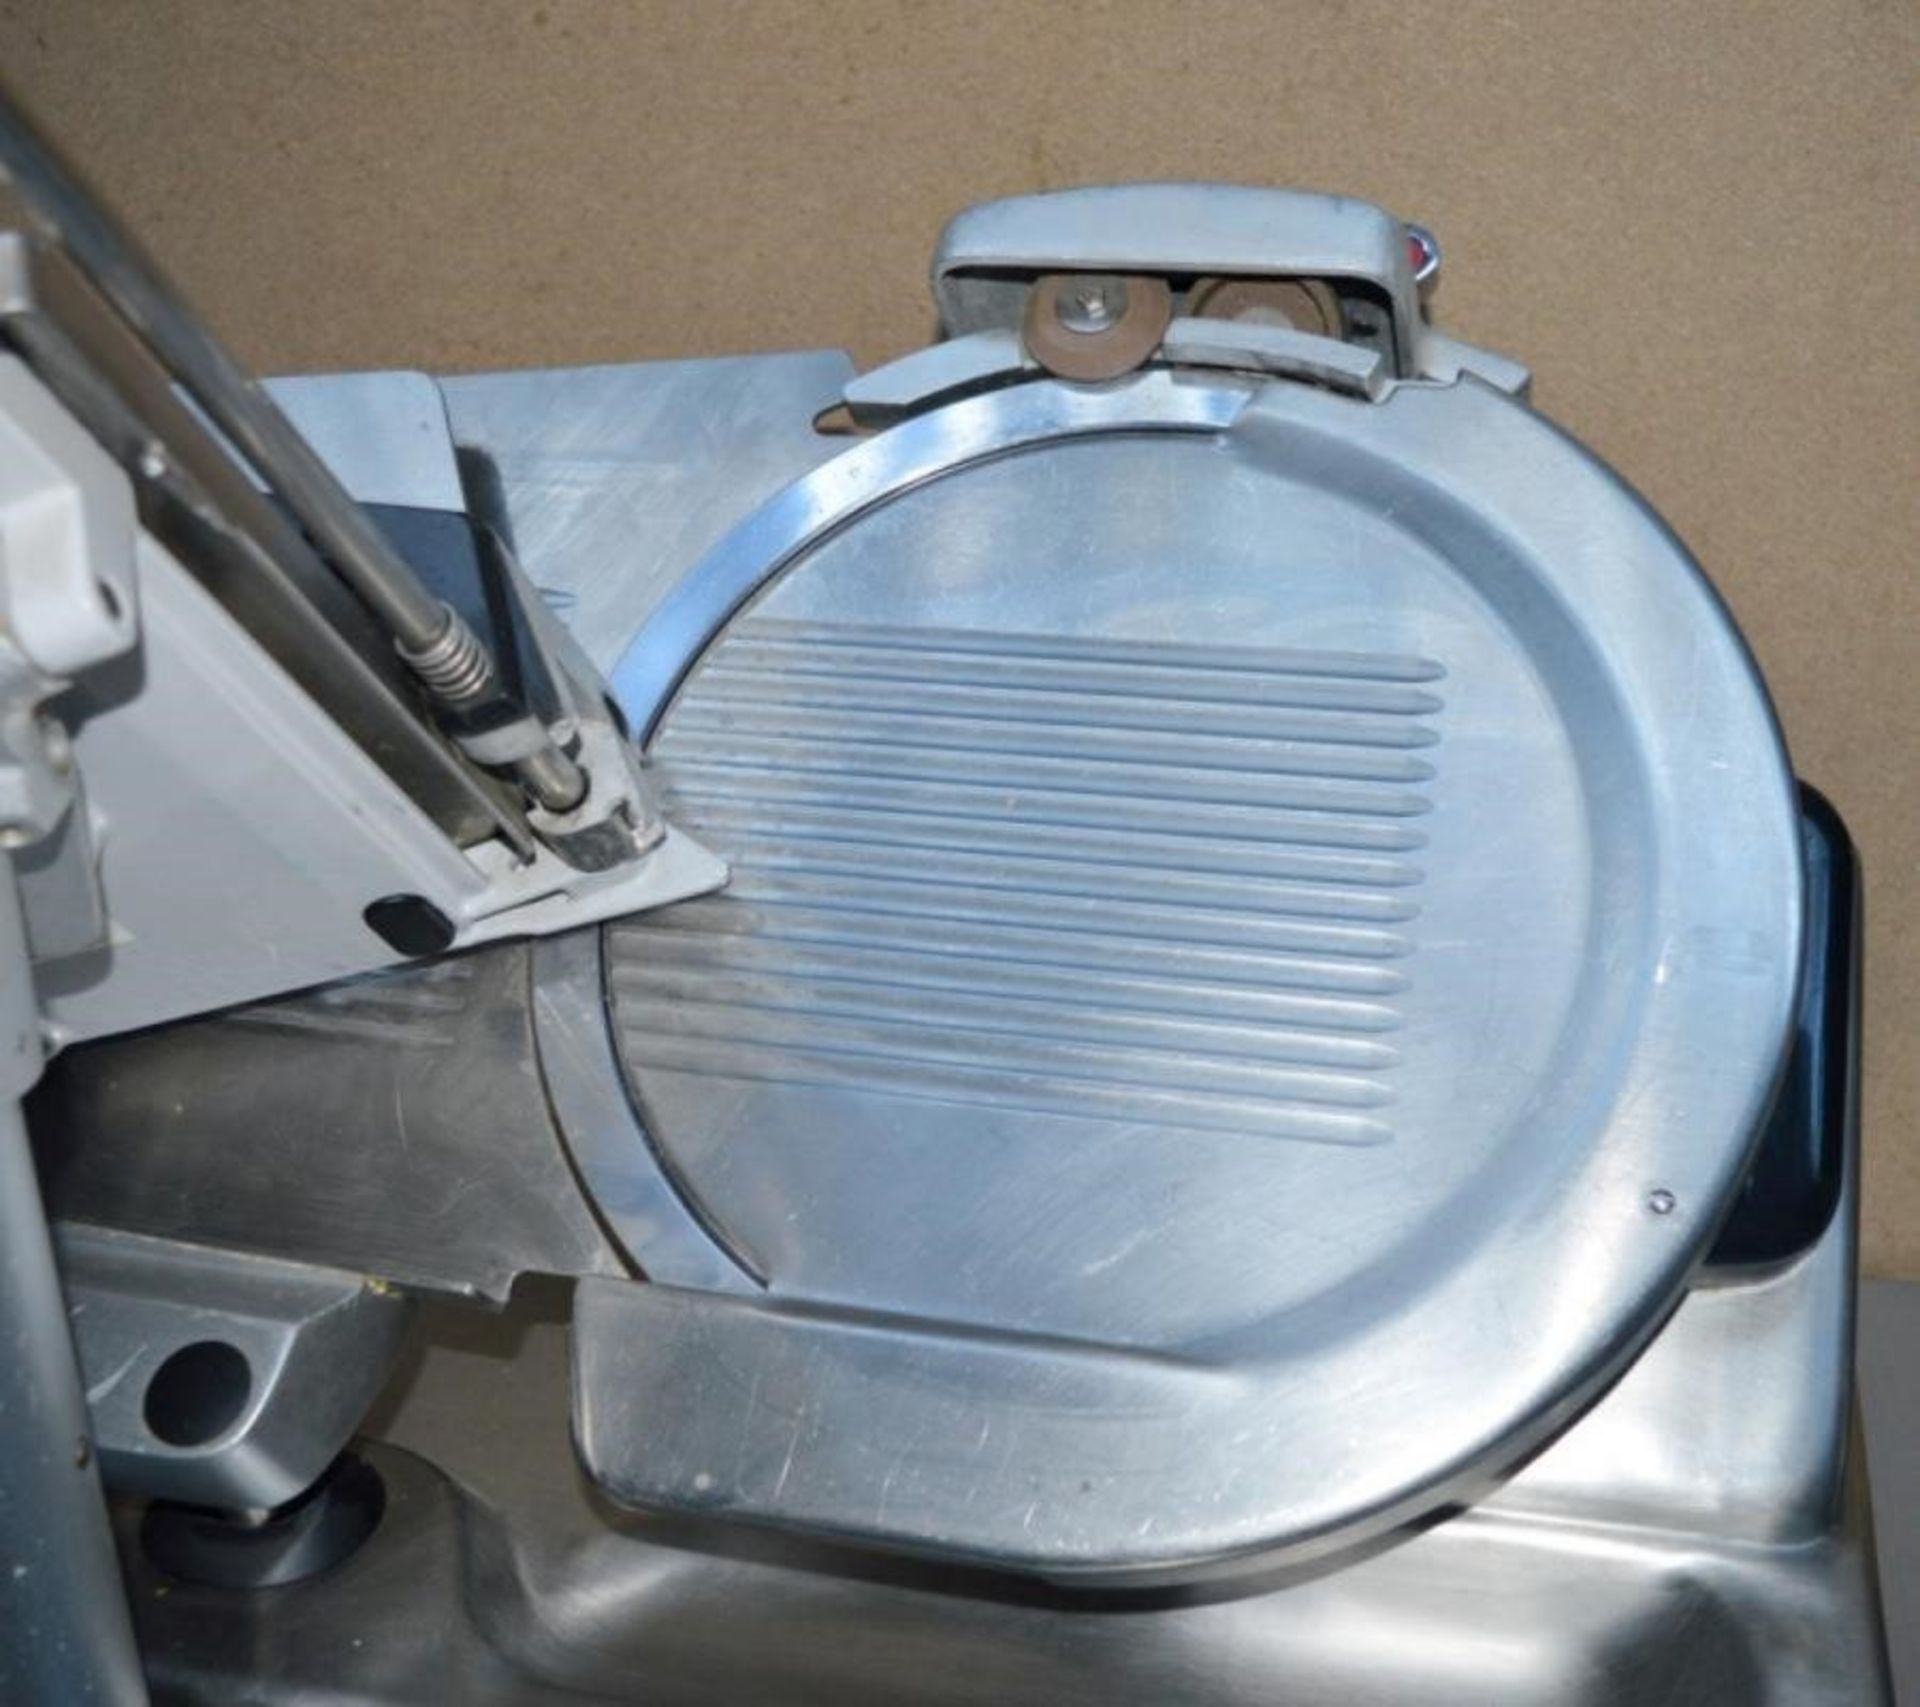 1 x Berkel 800S 12" Commercial Cooked Meat / Bacon Slicer - 220-240v - Dimensions H58 x W72 x D48 cm - Image 7 of 9